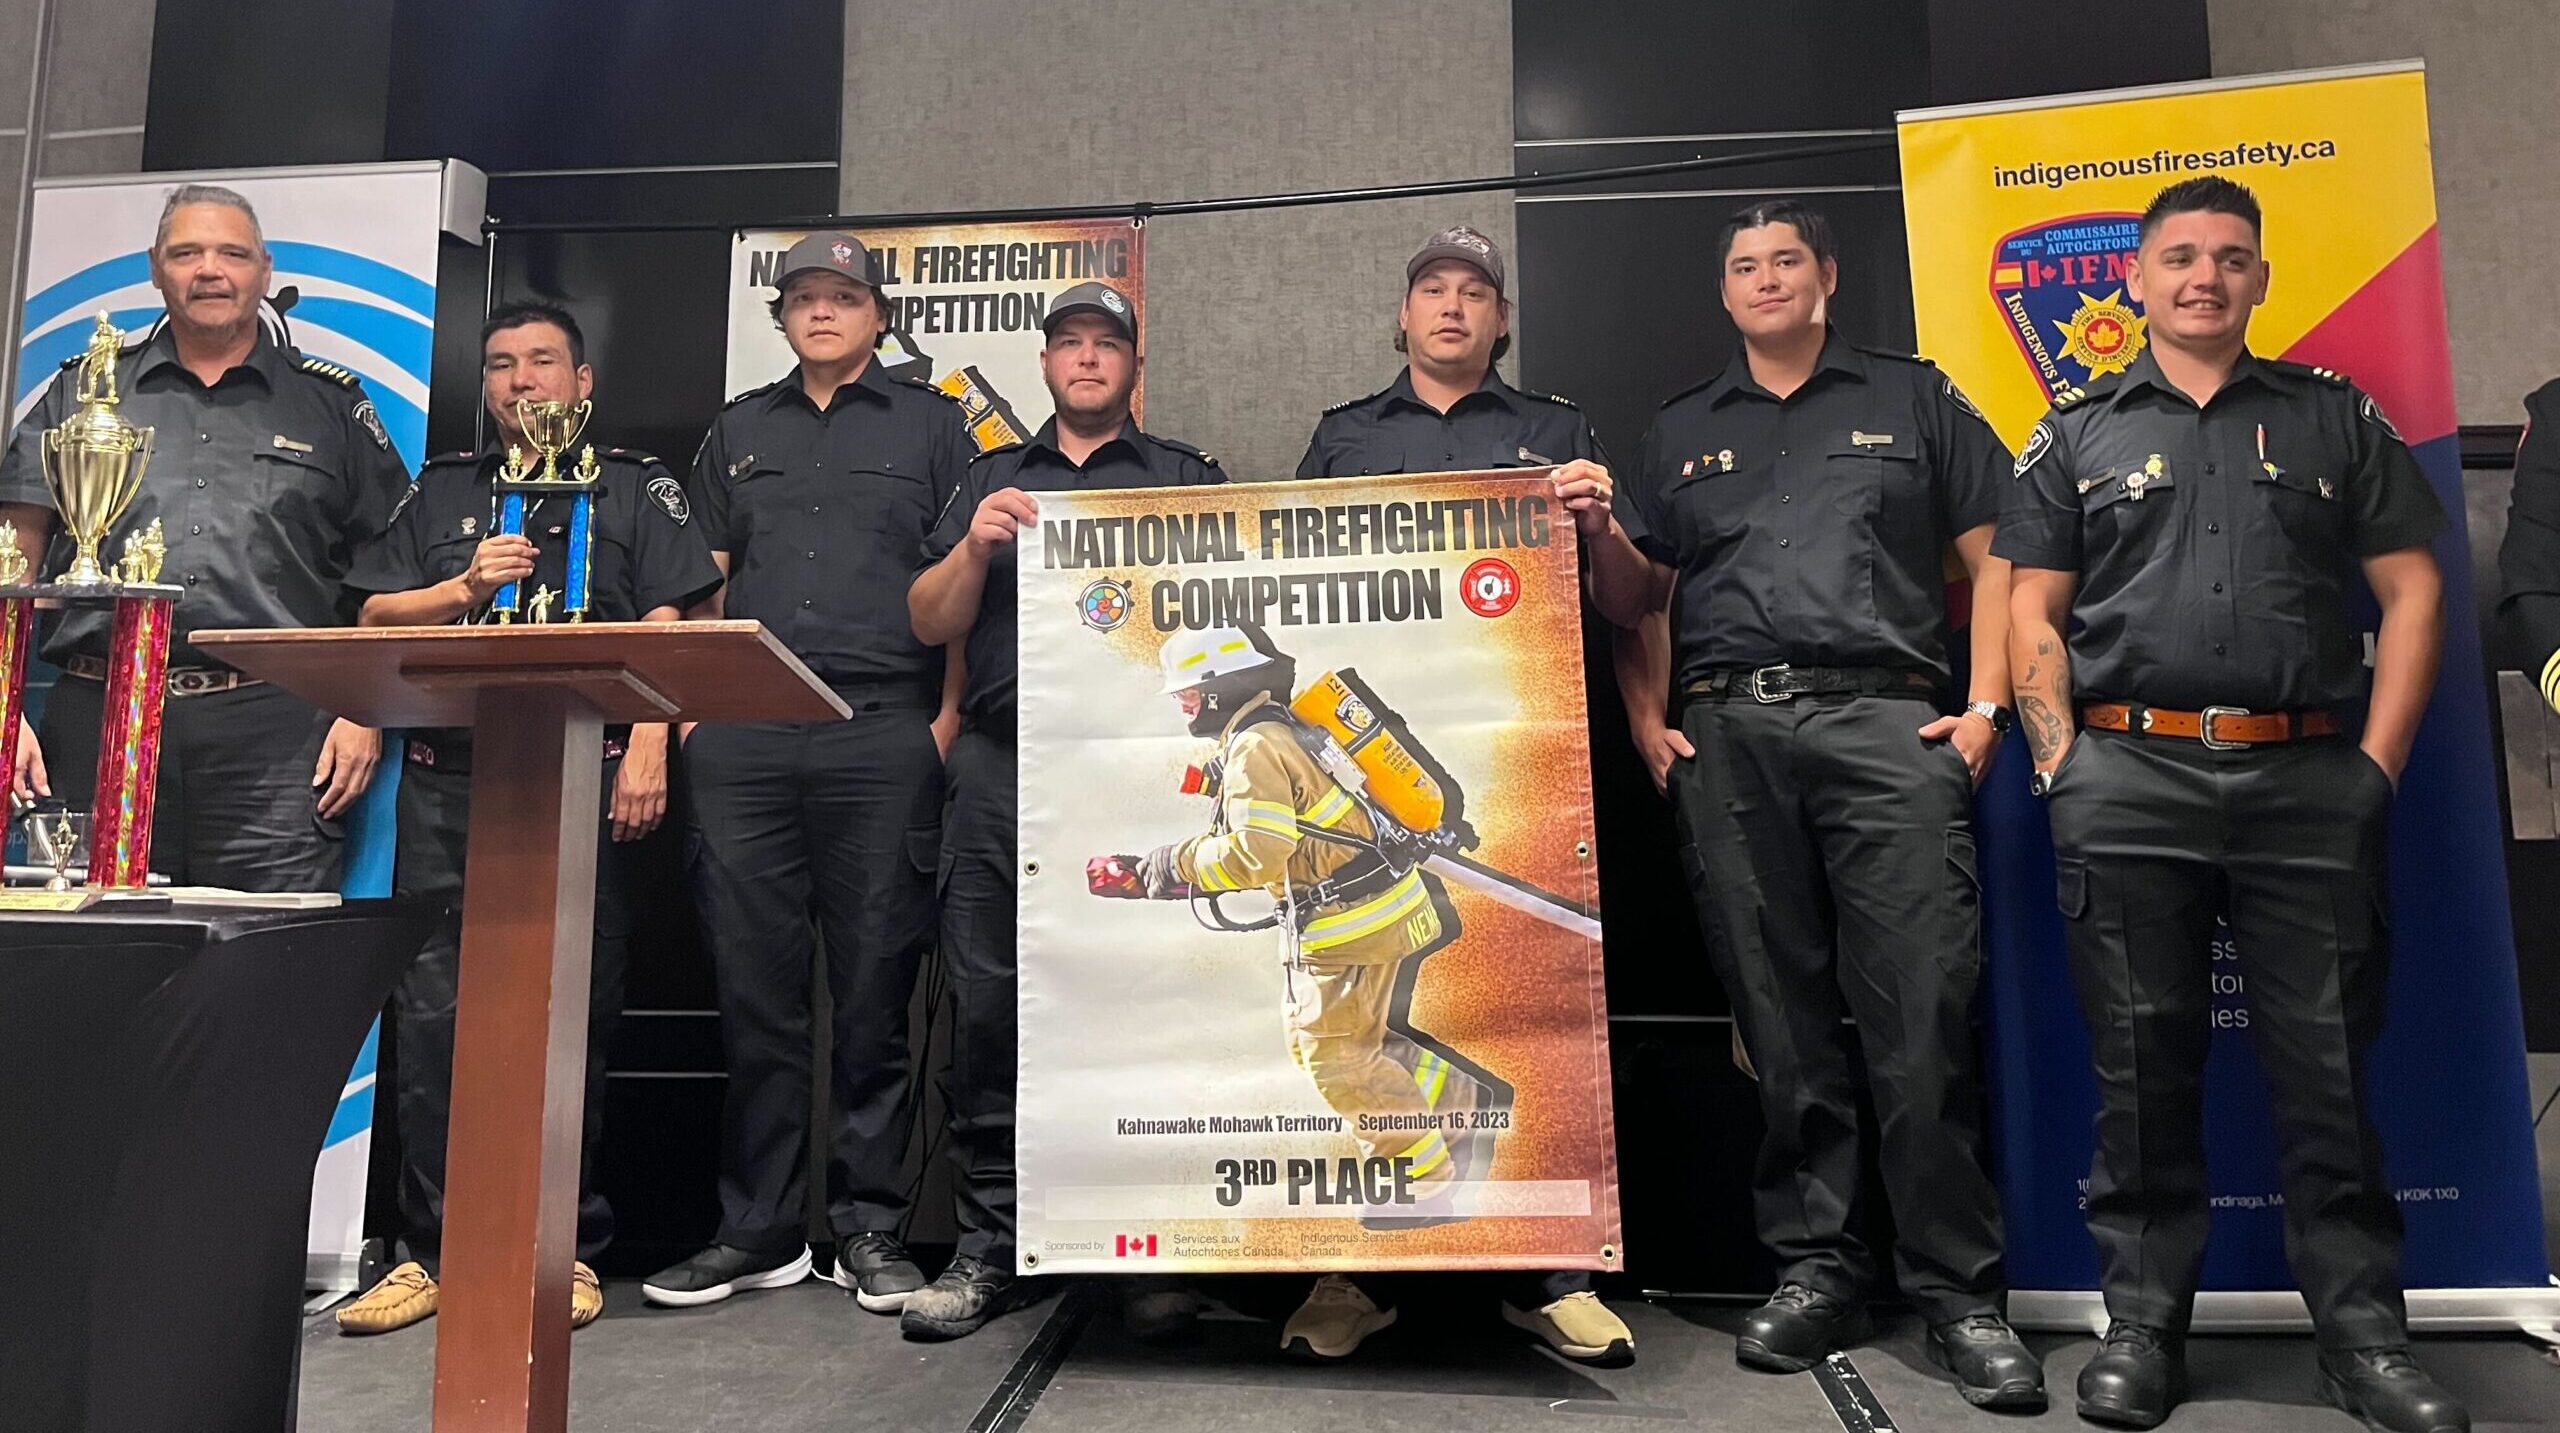 Team BC Indigenous firefighters accepting their 3rd place trophy at the national competition in Montreal